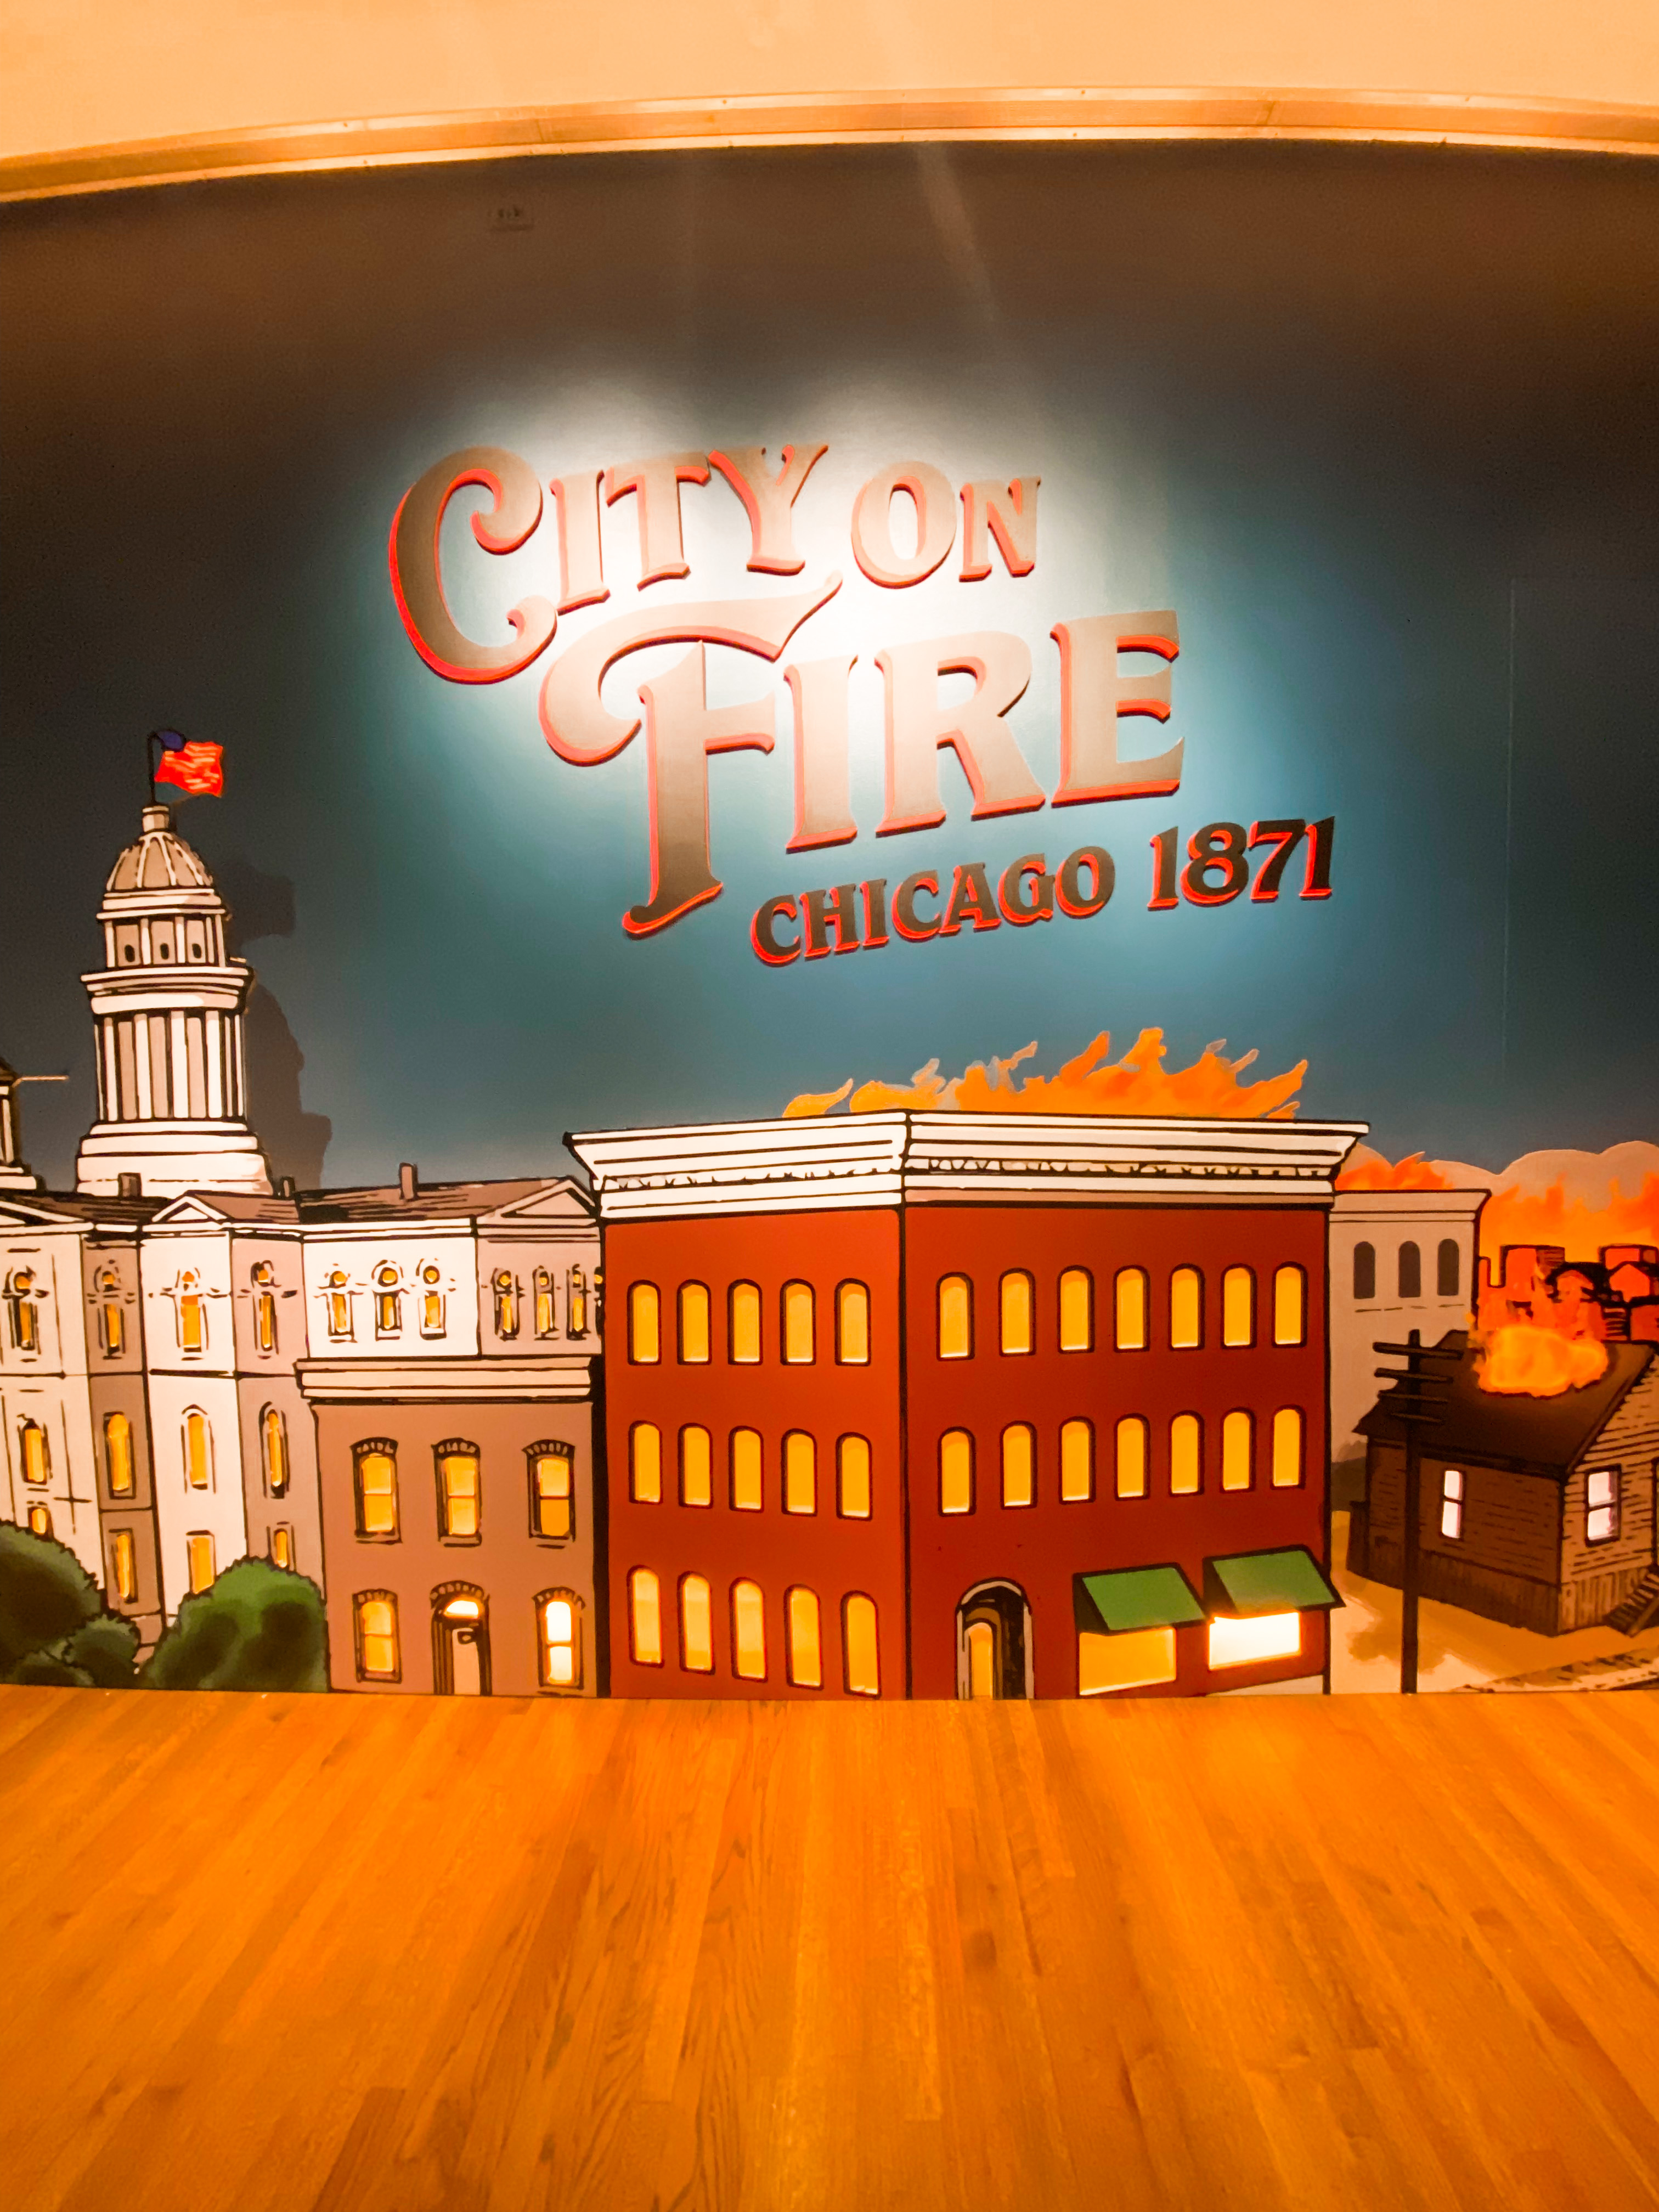 Chicago Fire new exhibit at the Chicago History Museum 